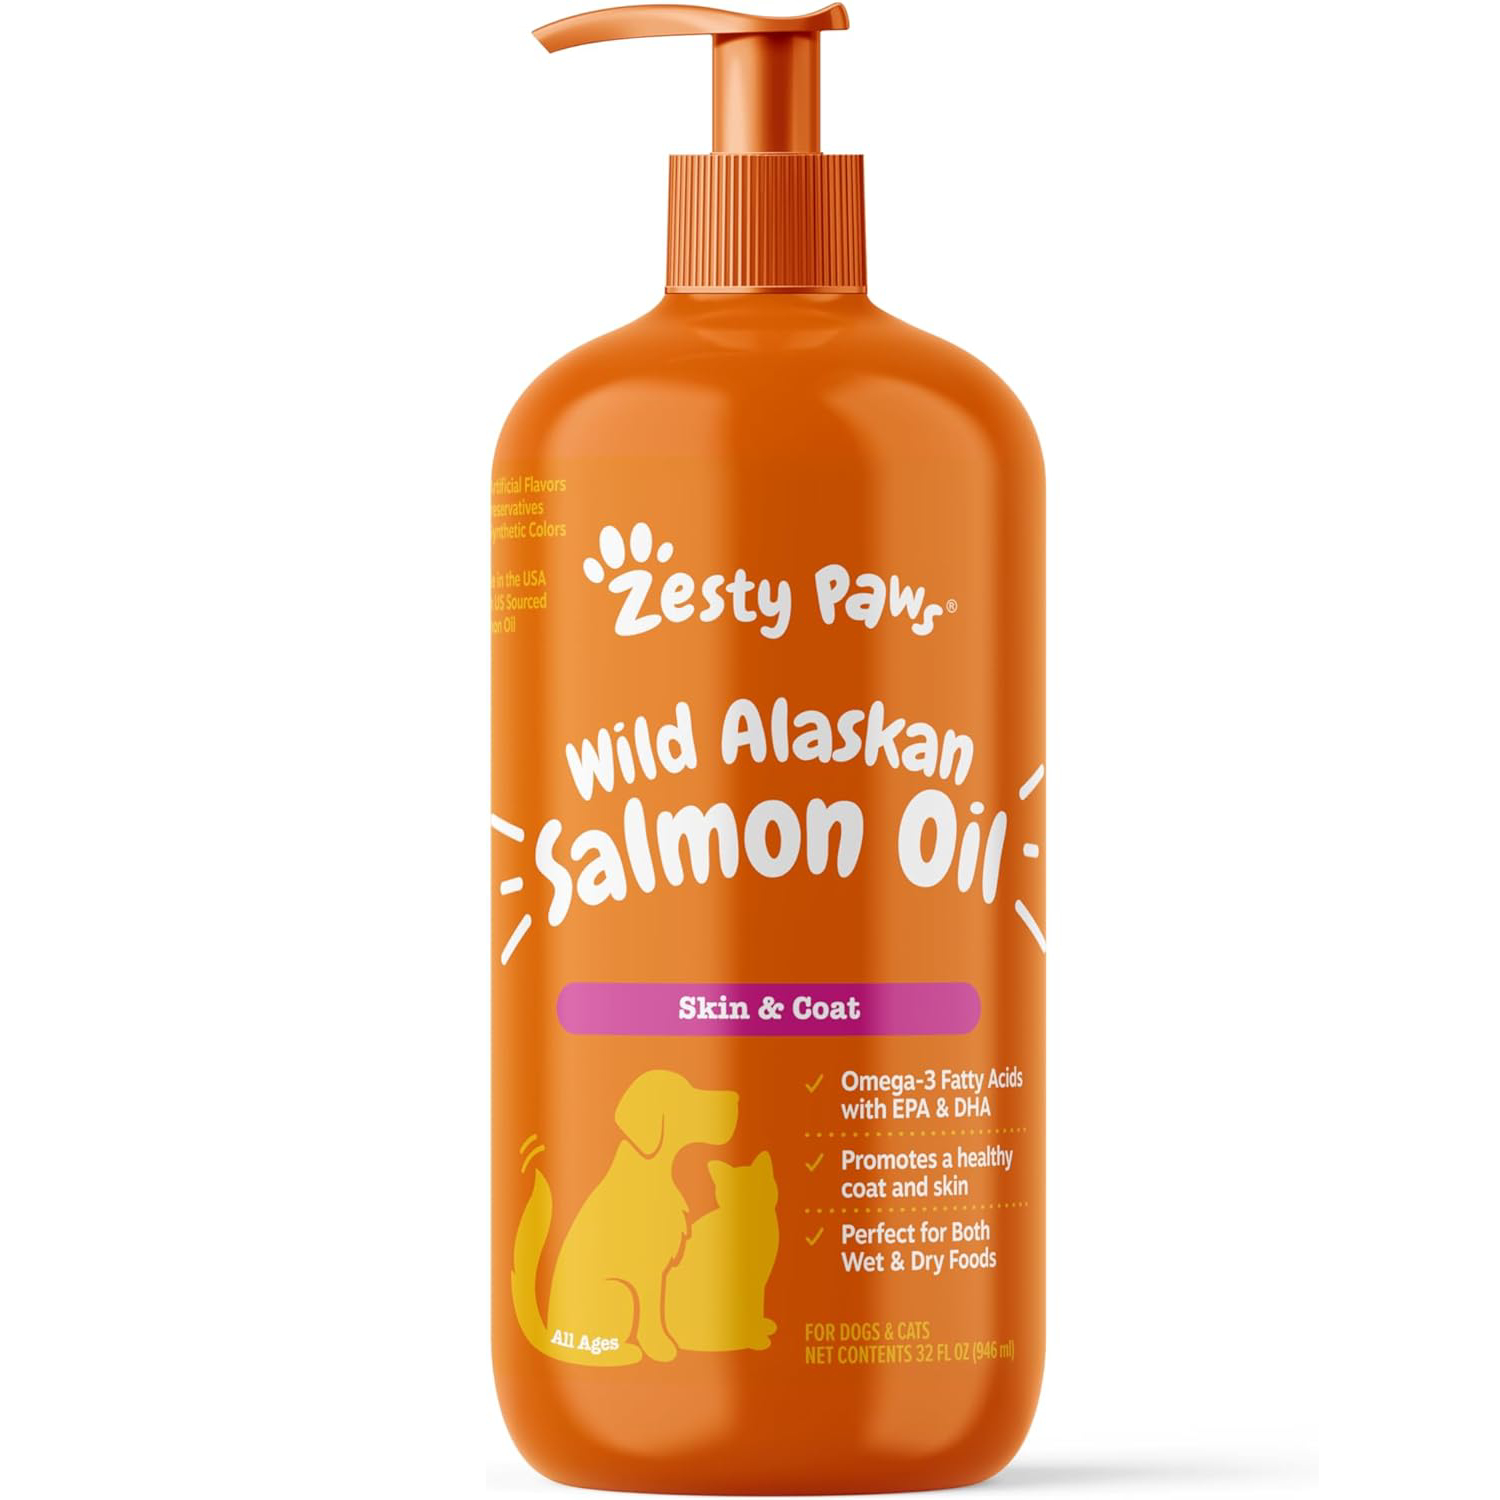 Zesty Paws Salmon Oil for Dogs and Cats with Wild Alaskan Salmon Oil Omega 3 and 6 Fatty Acids with EPA DHA for Pets